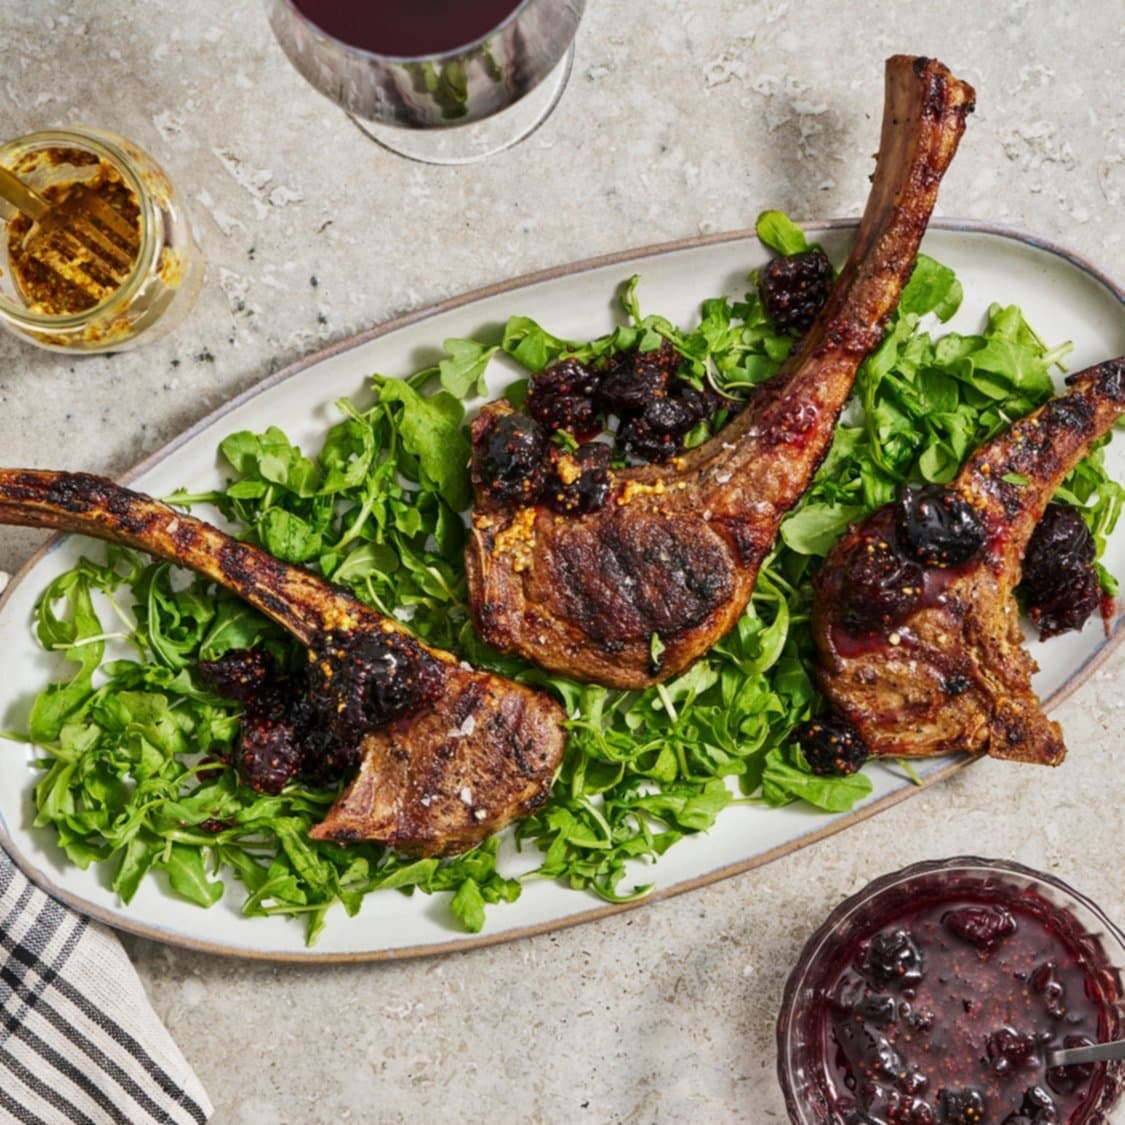 https://fleishigs.com/images/mobile-app/recipes/3493-list-grilled-lamb-chops-with-cherry-mostarda.jpg